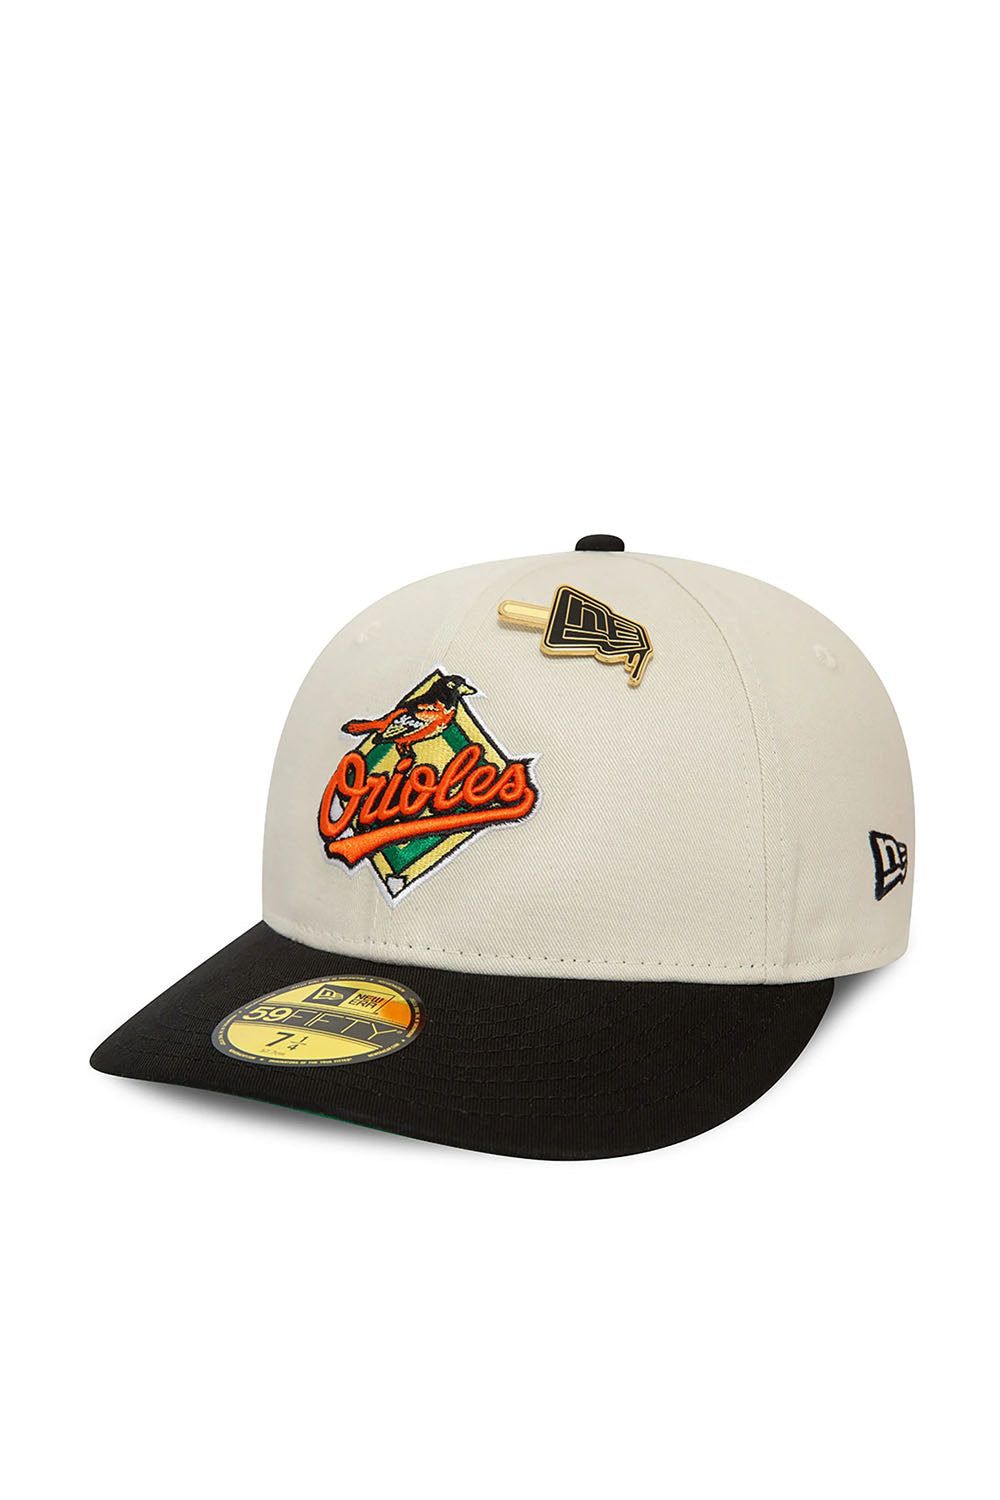 59FIFTY Low Profile Baltimore Orioles MLB Pin Cap